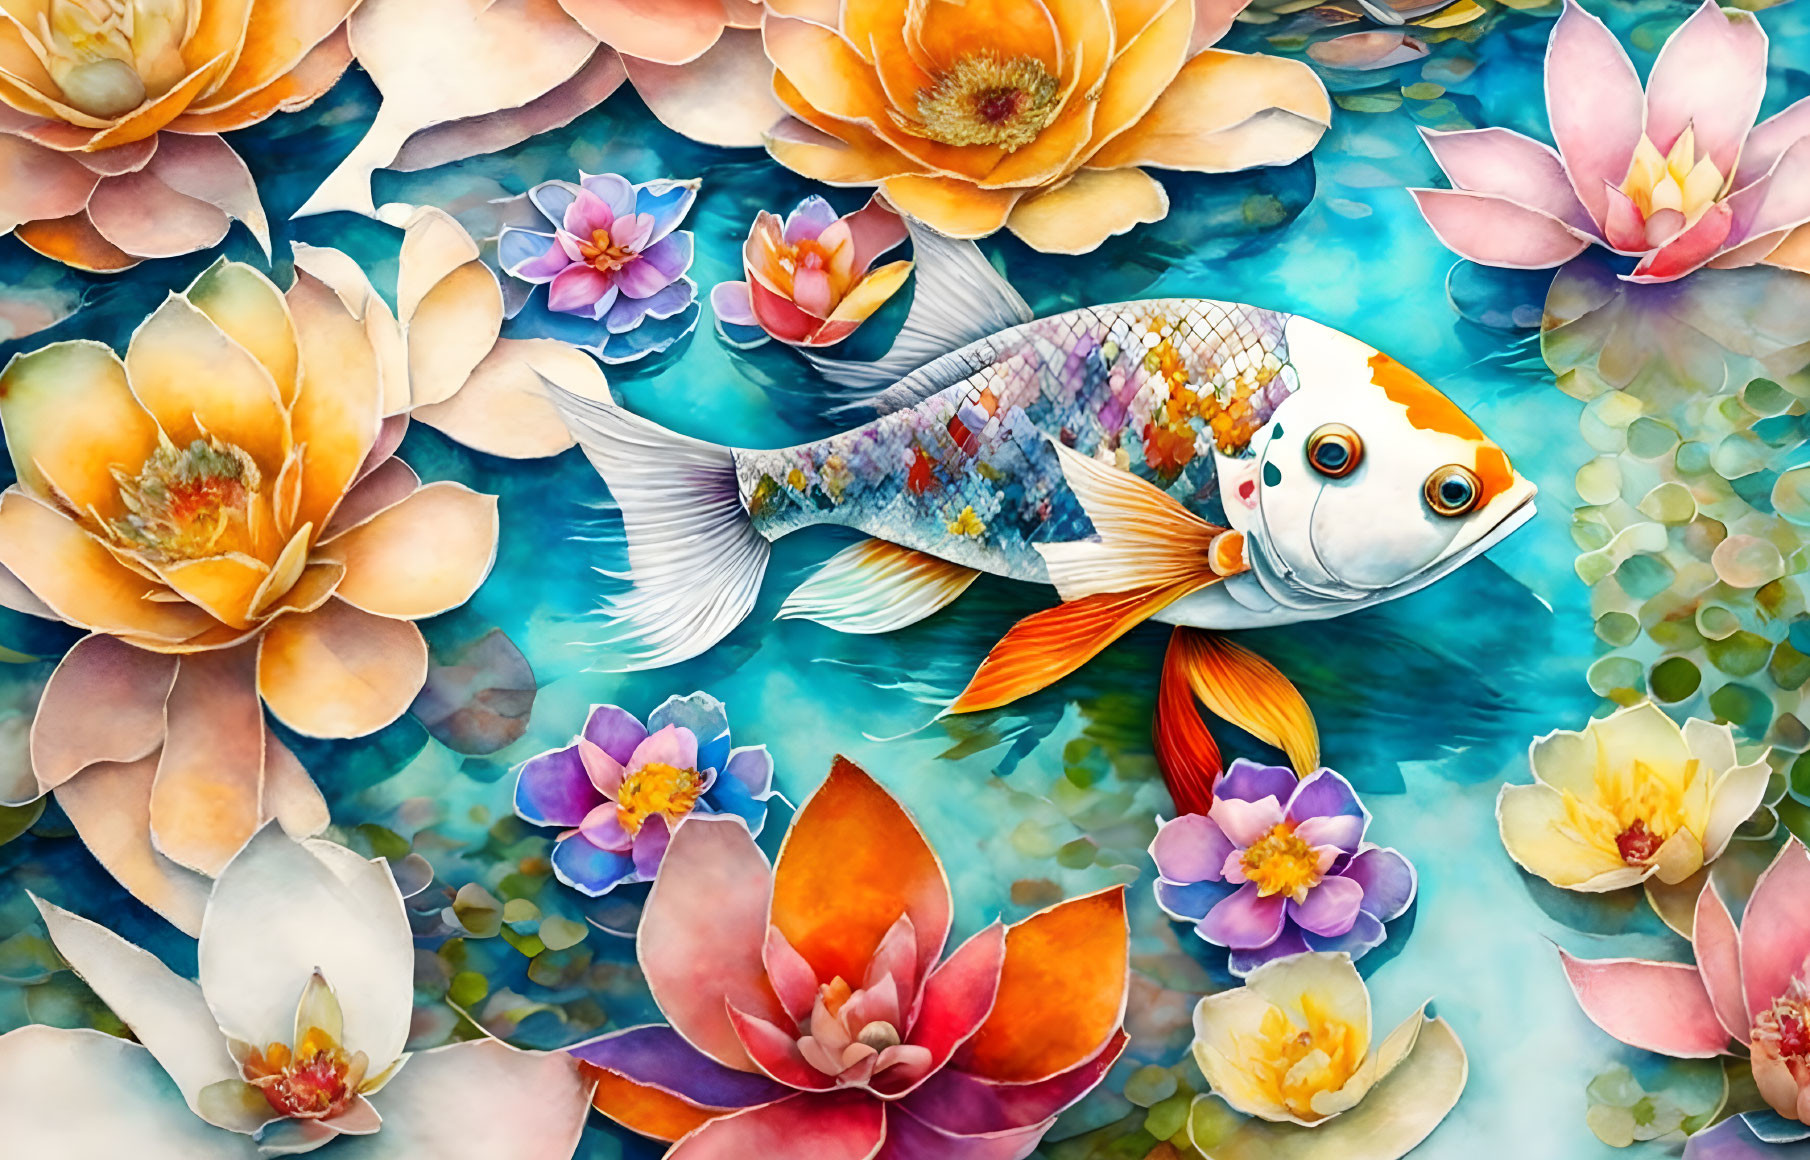 Colorful Fish Swimming Among Multicolored Lotus Flowers in Blue Water